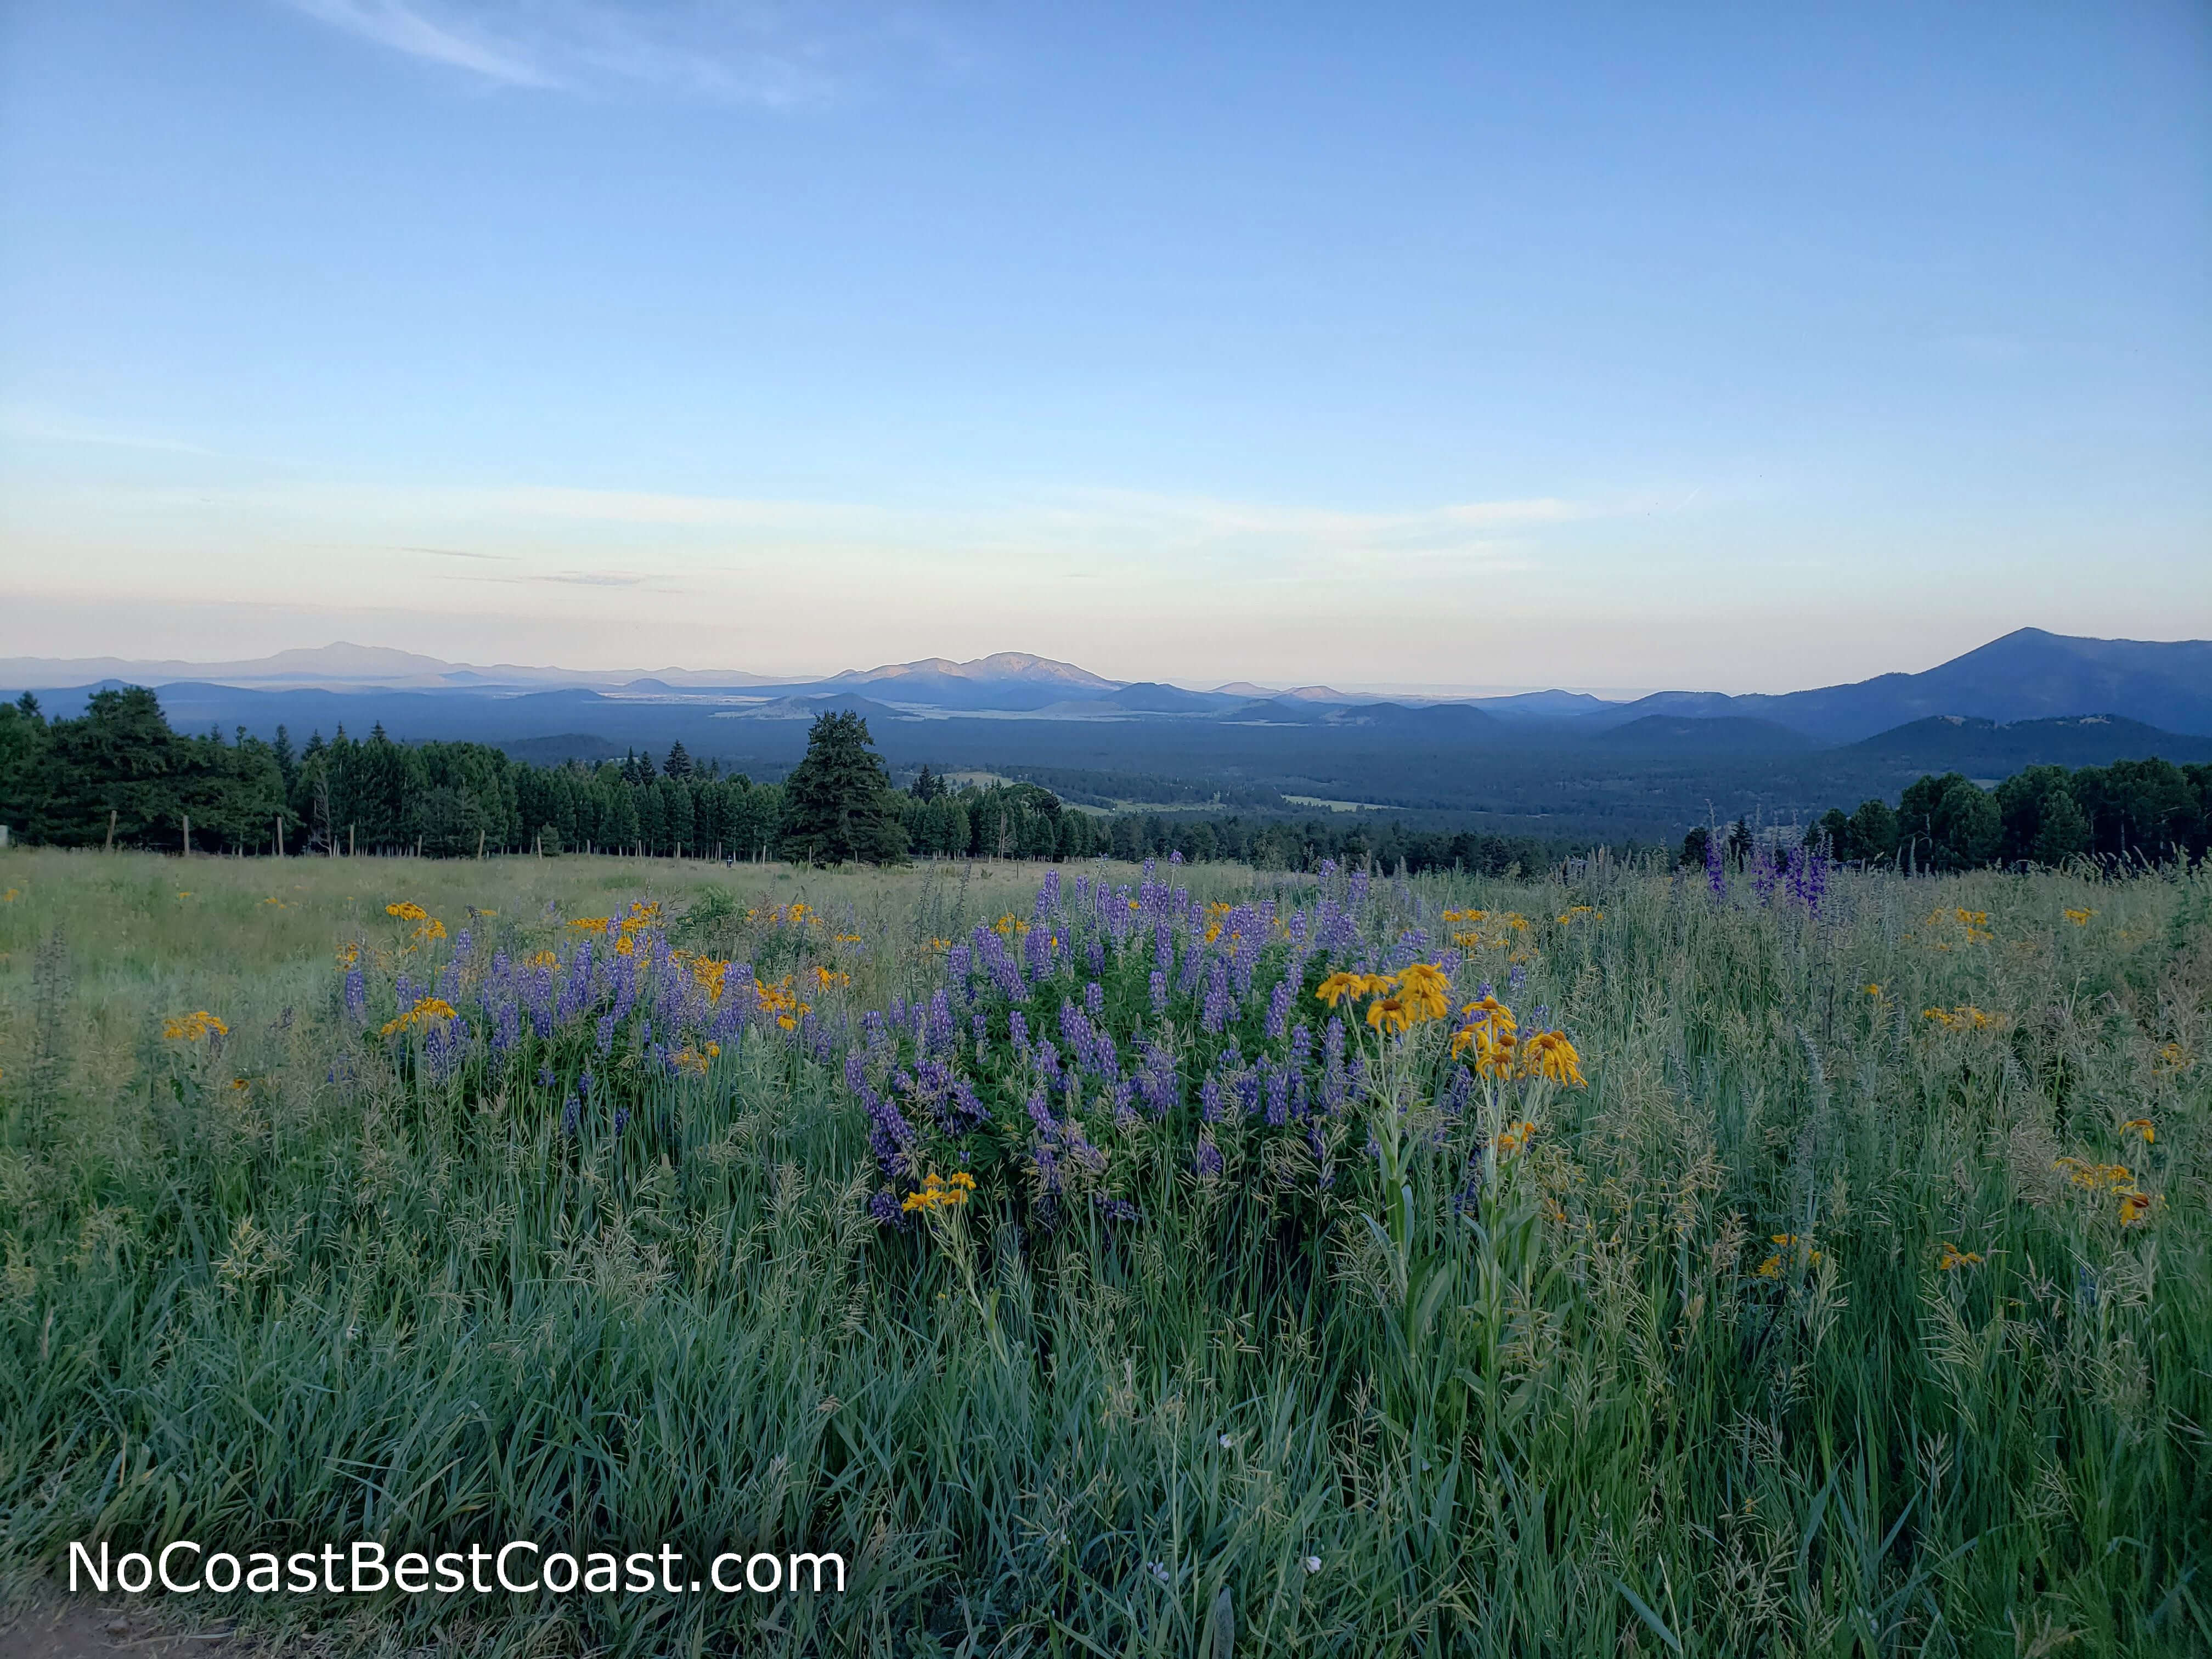 Flower-filled meadows greet you at the start of the Humphreys Peak Trail